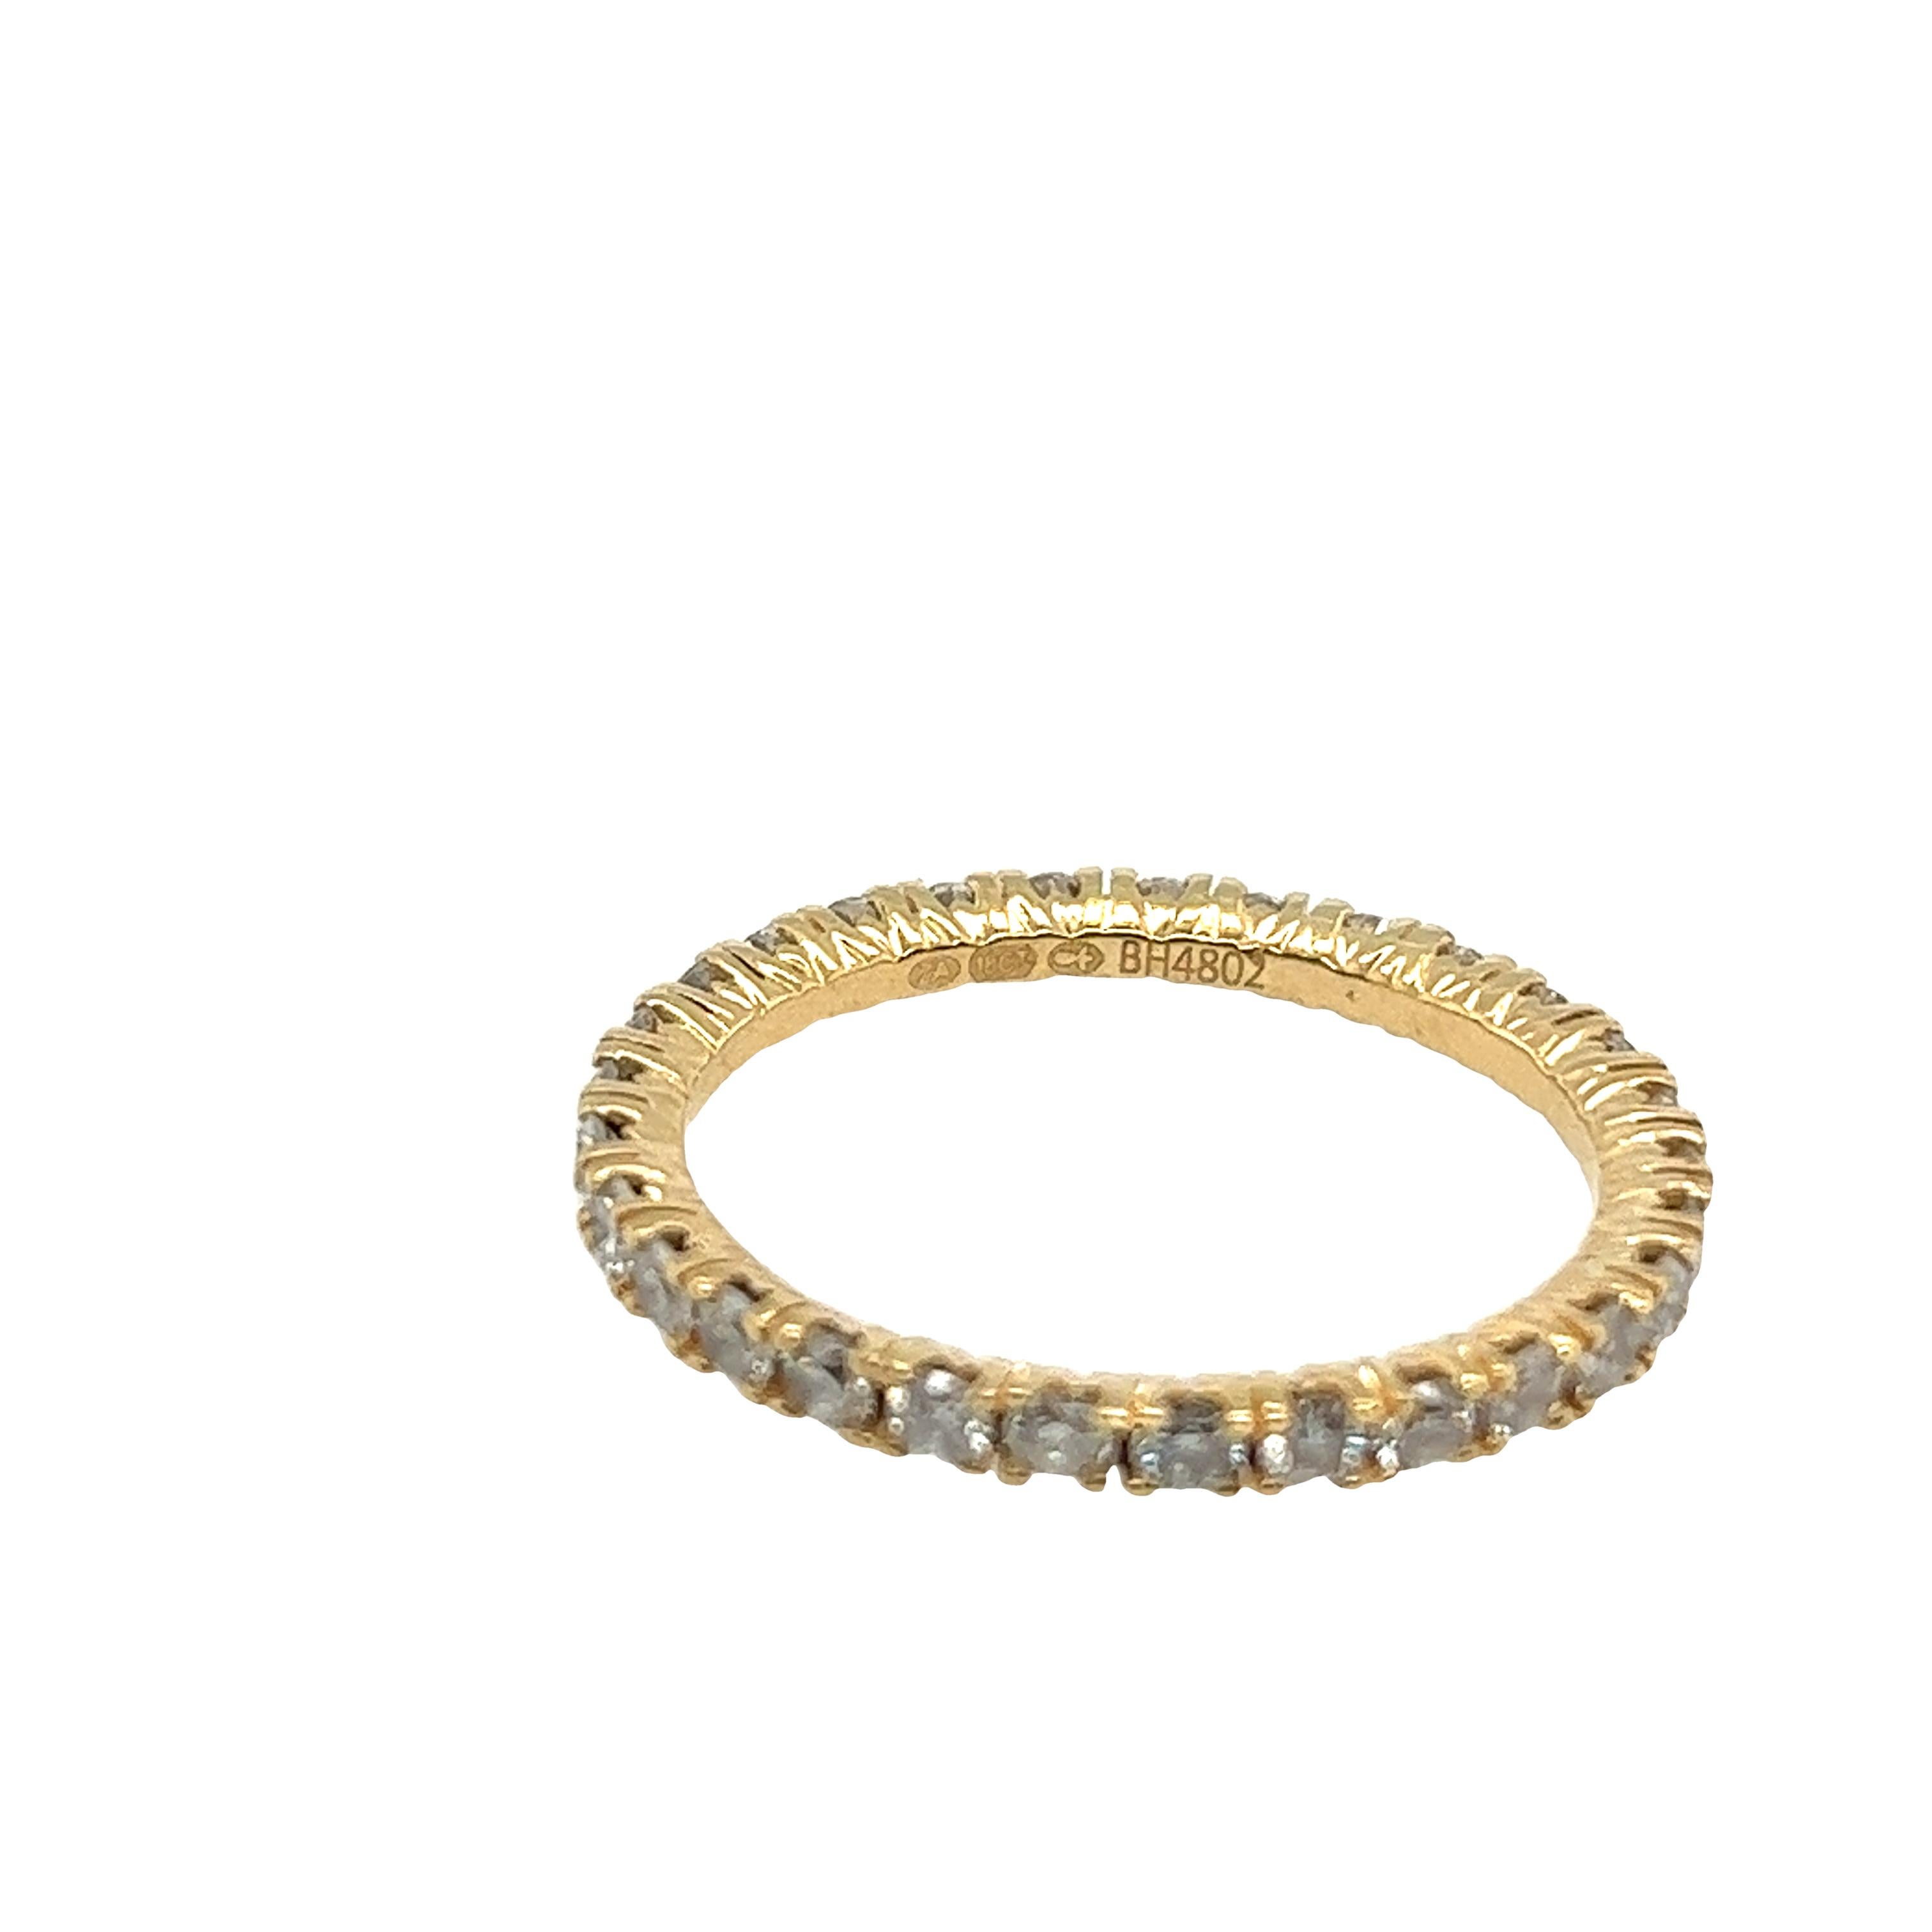 Adorn your finger with this breathtaking Browns 18ct Yellow Gold Diamond Full Eternity Ring Set. Features 29 round diamonds with a total carat weight of 0.90ct H colour grade and SI clarity grade.
Make a statement with this stunning piece of fine